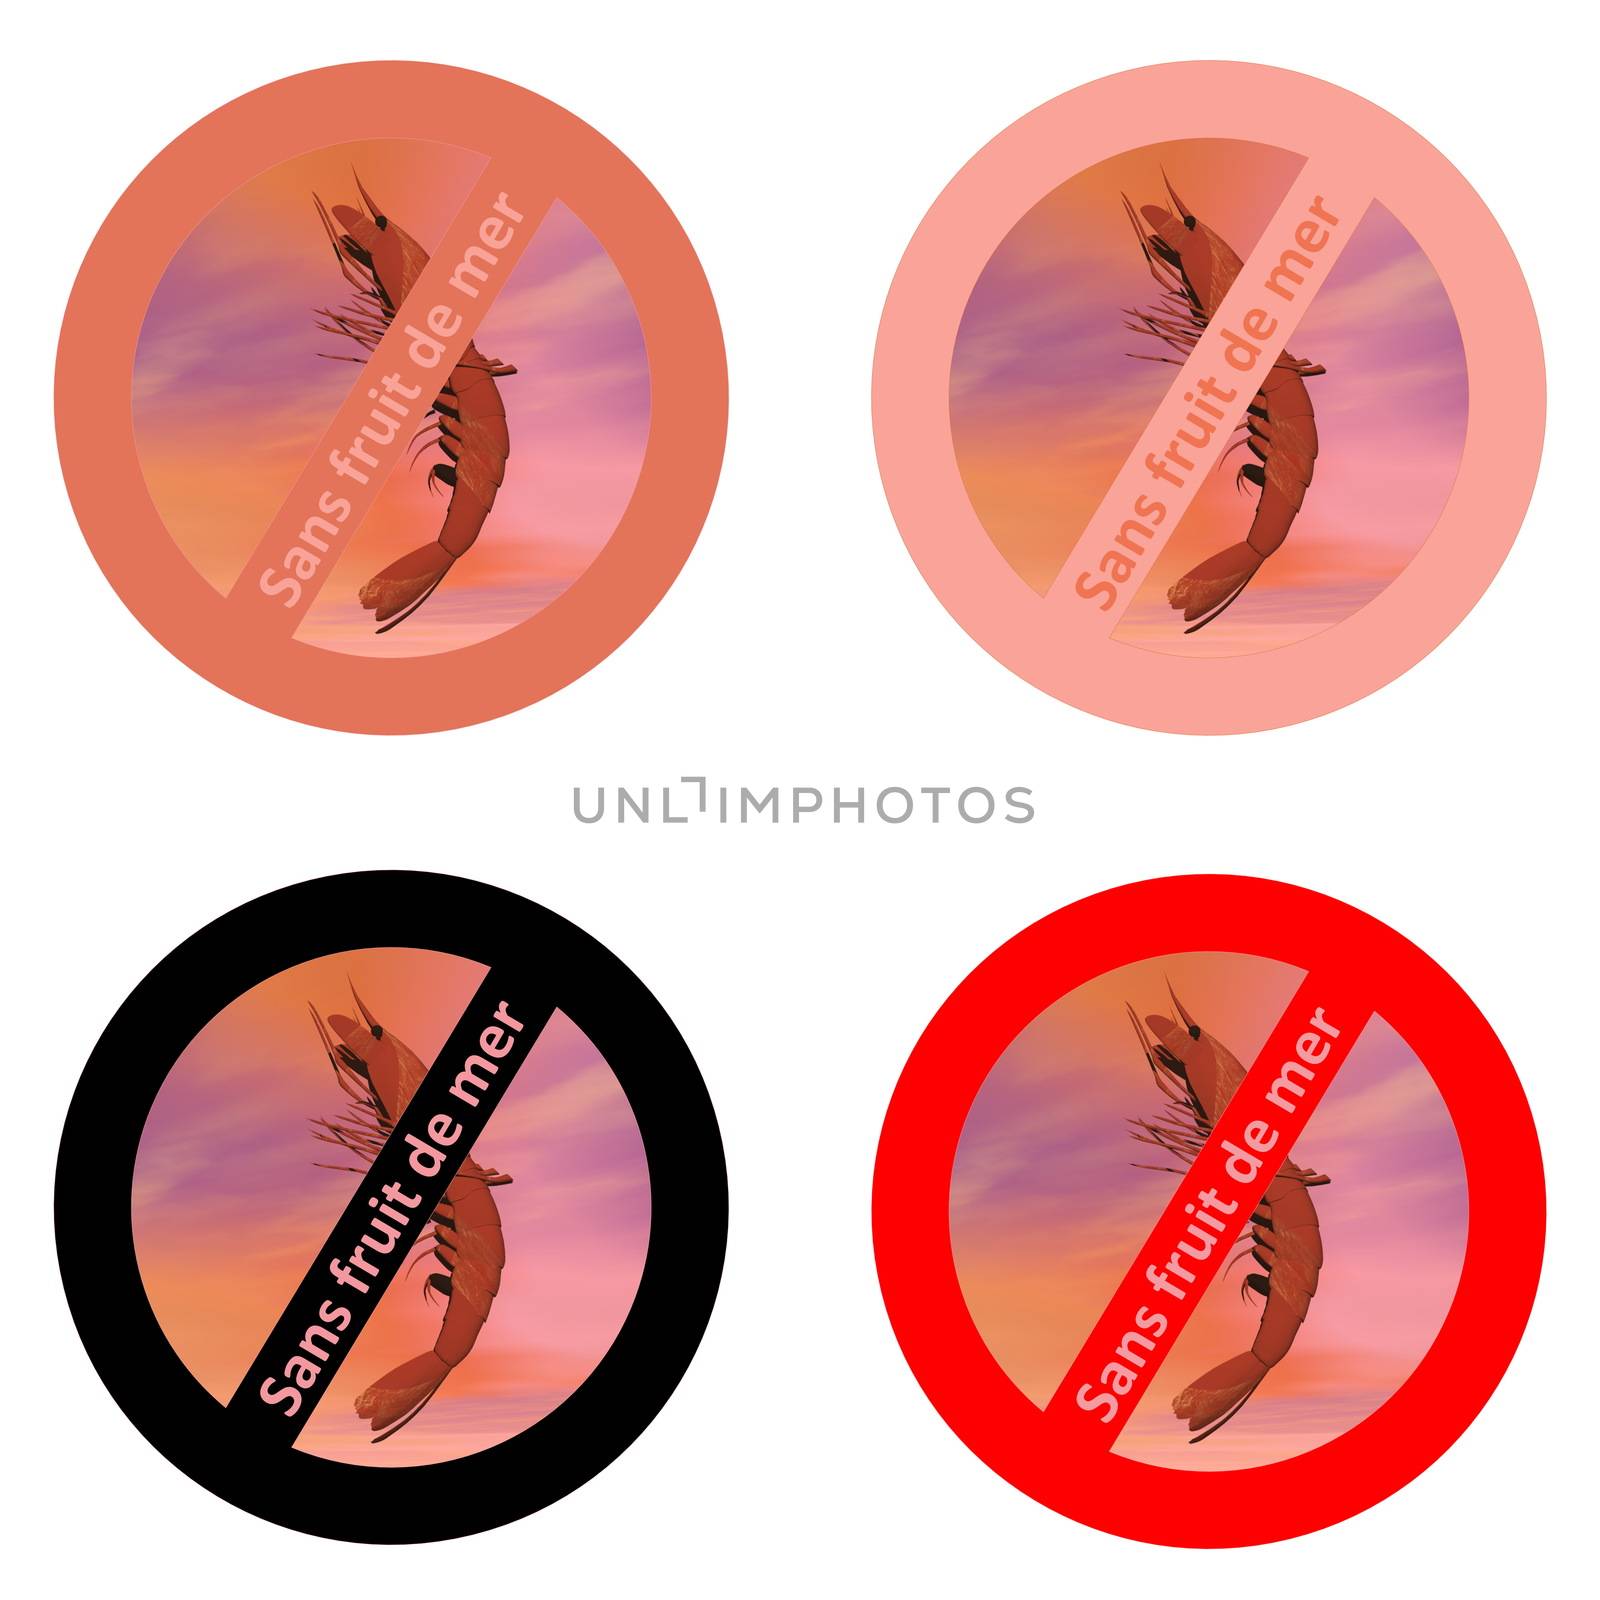 French stickers for shellfish free products by Elenaphotos21